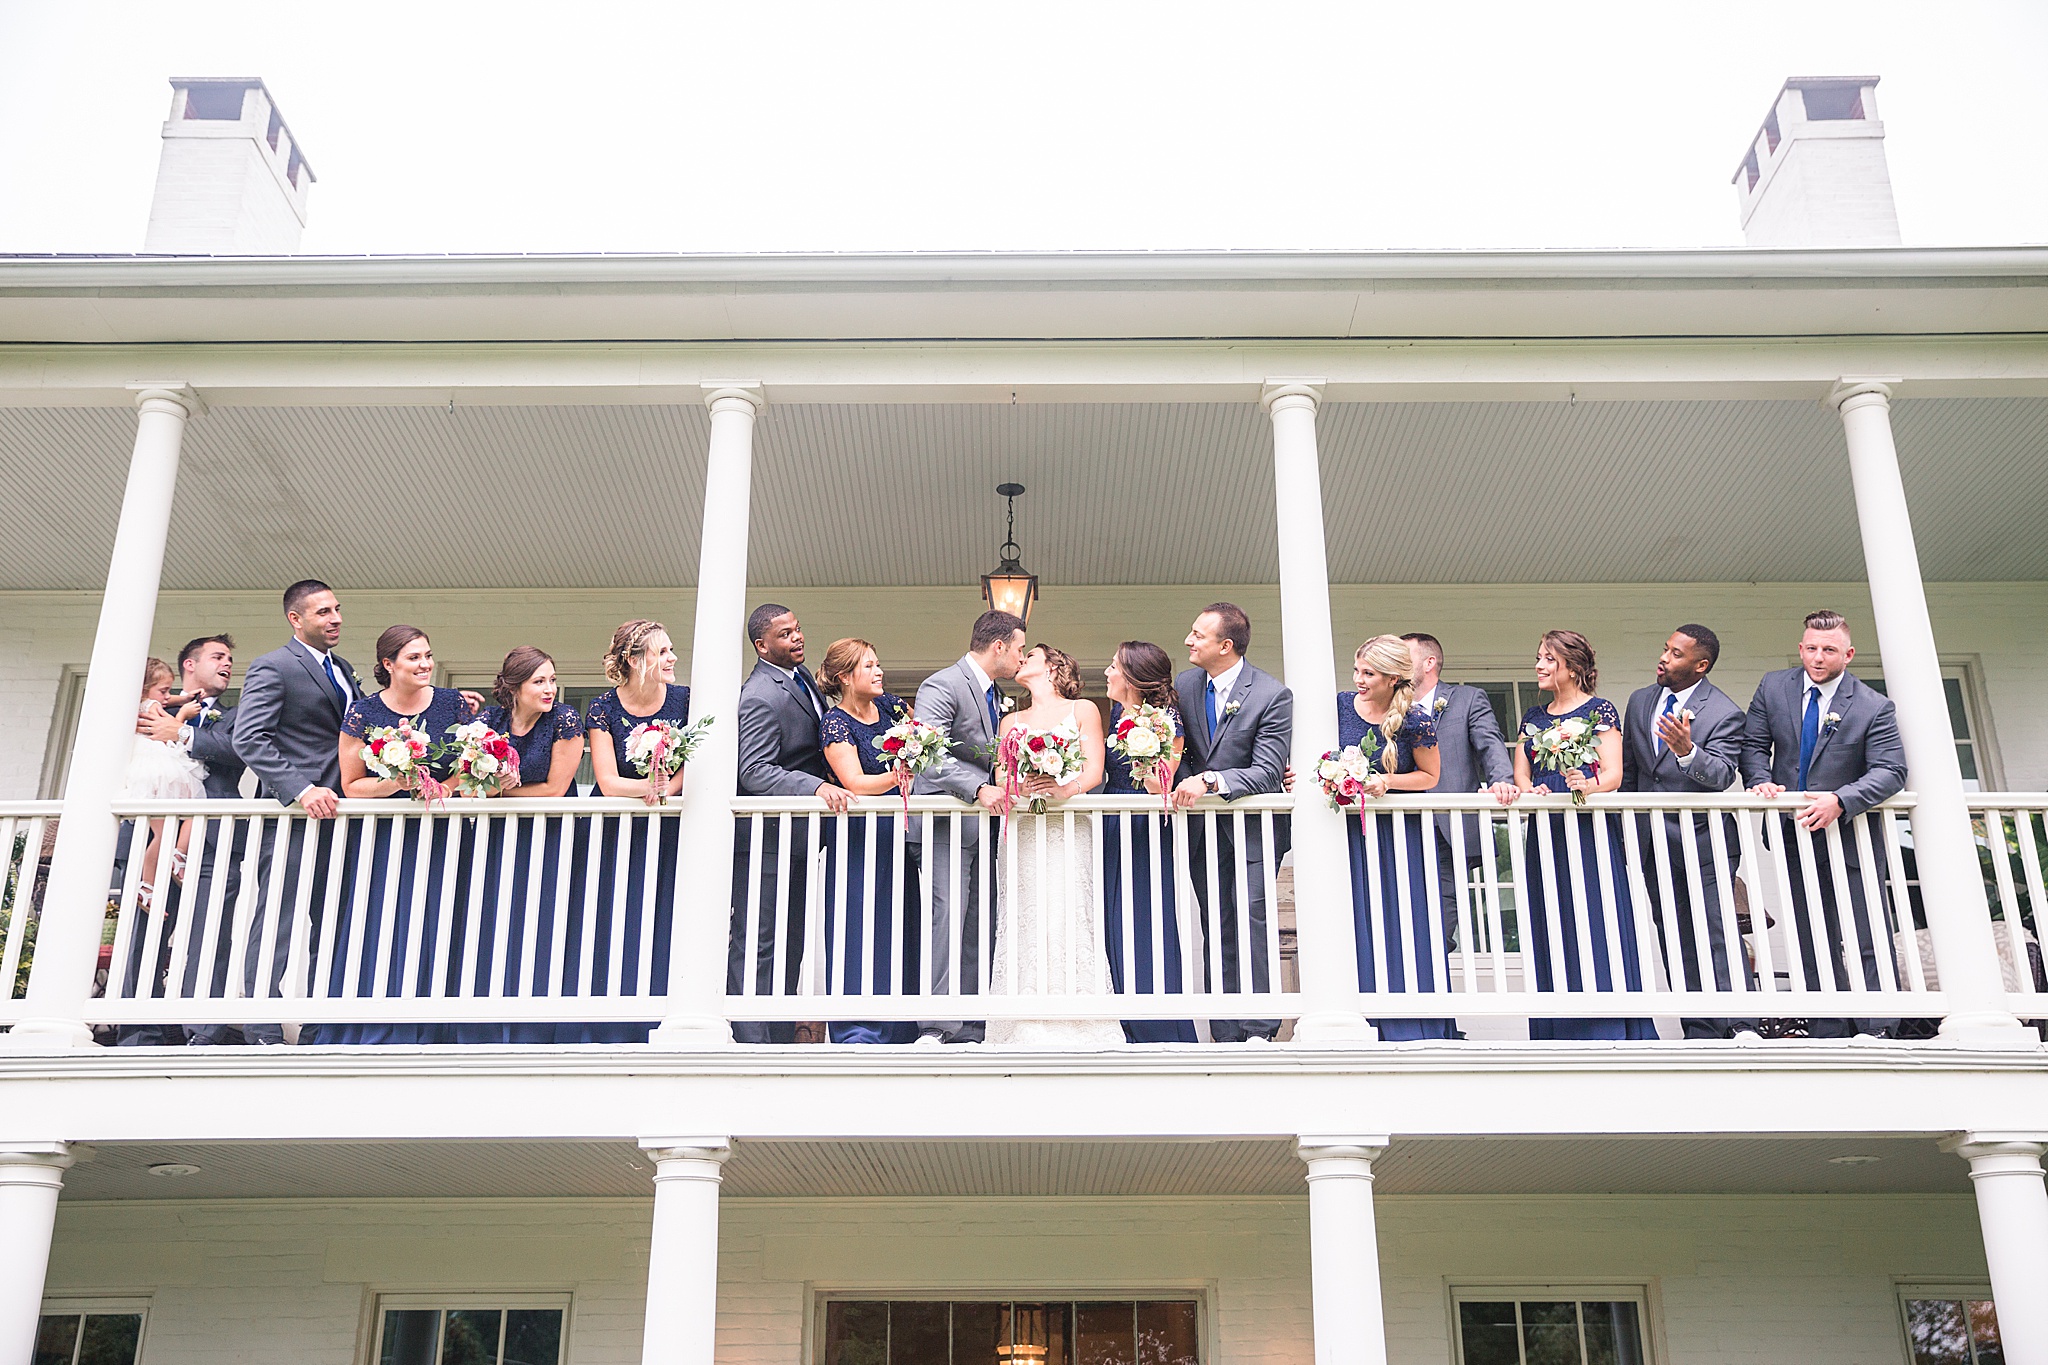 bride and groom with wedding party on balcony photographed by Alexandra Mandato Photography